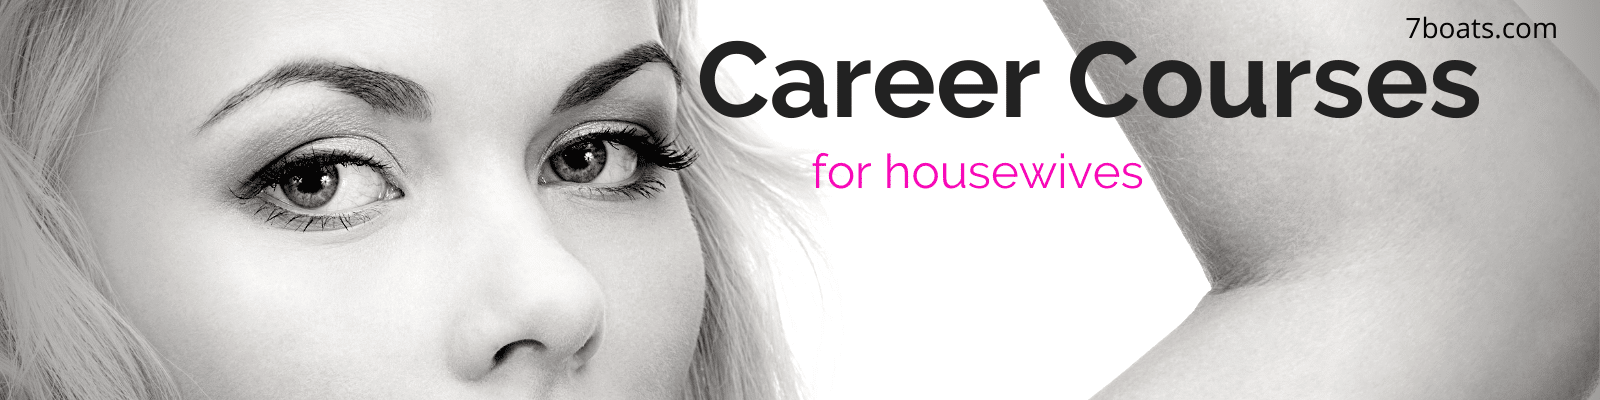 career courses for housewives to earn money